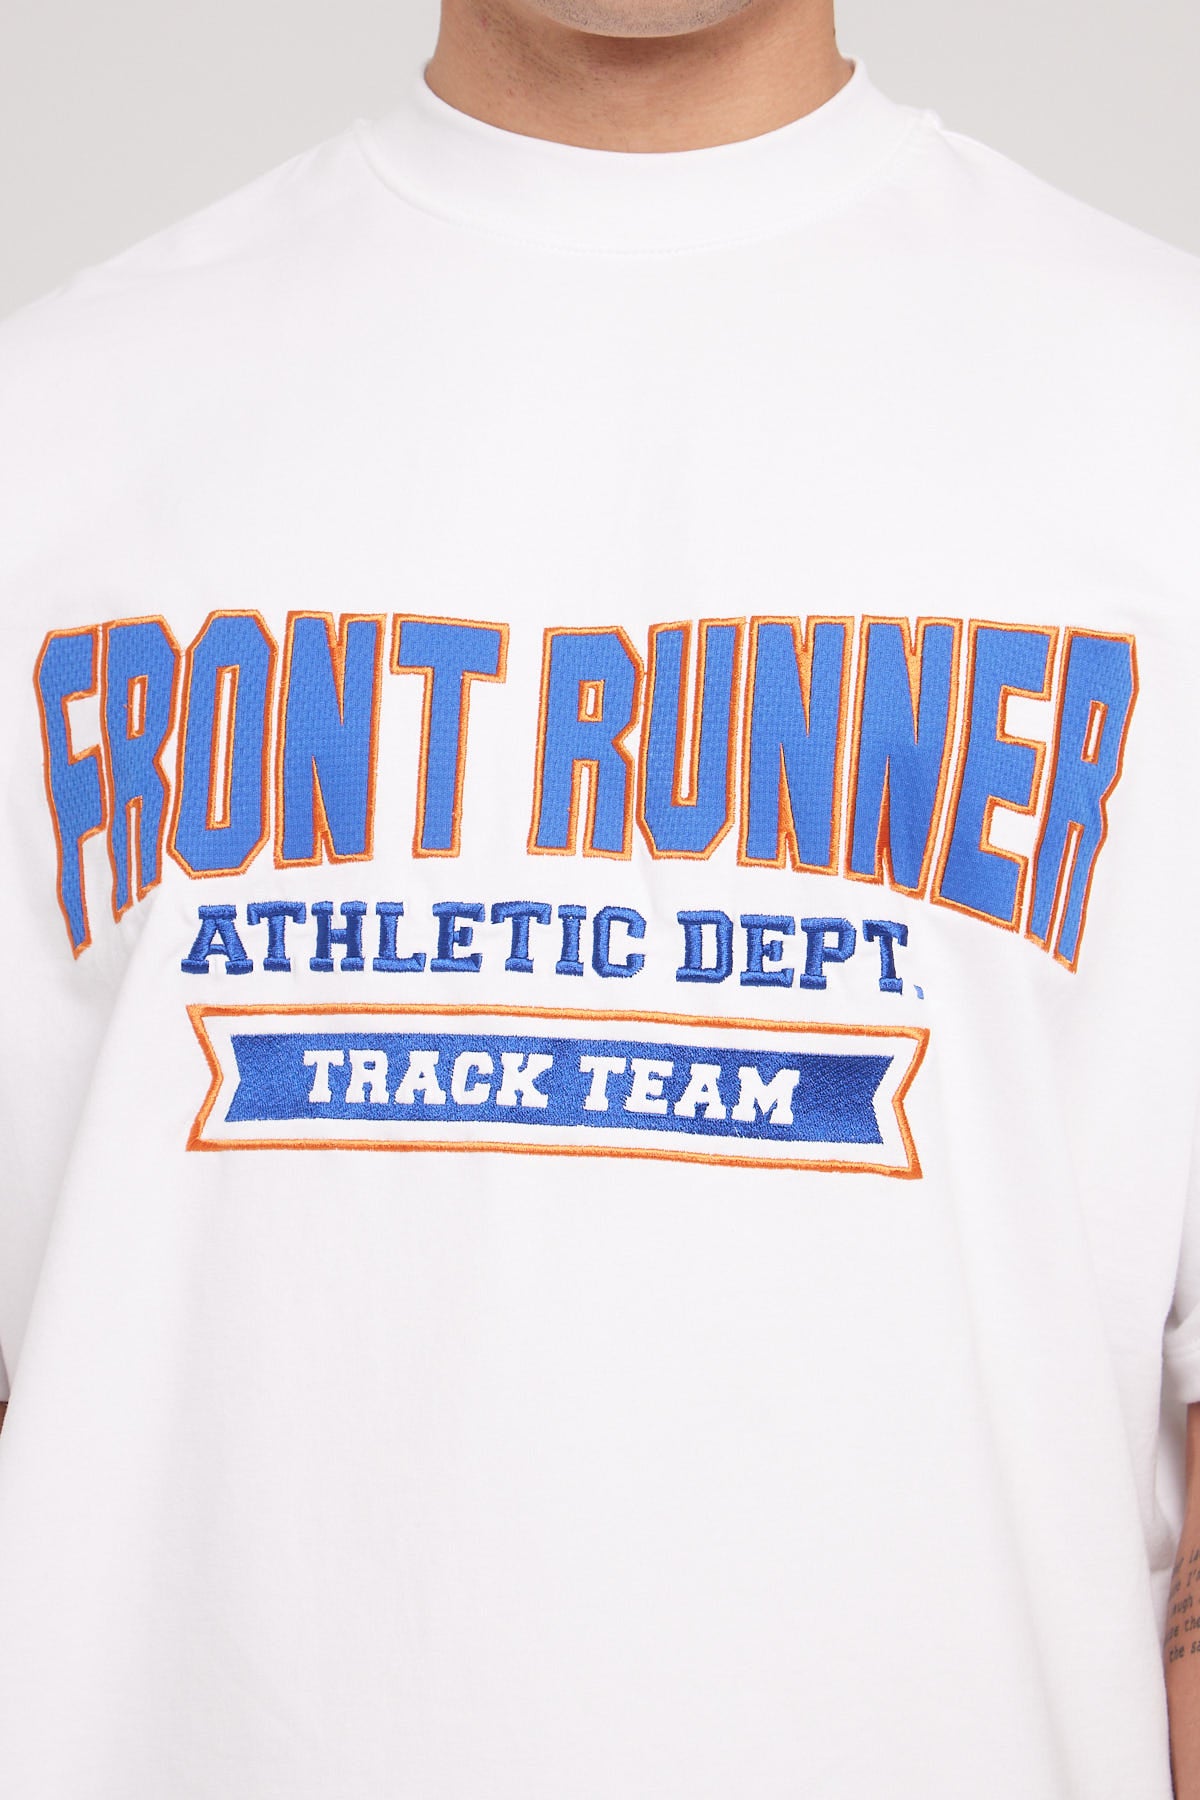 Front Runner Athletic Department Tee White